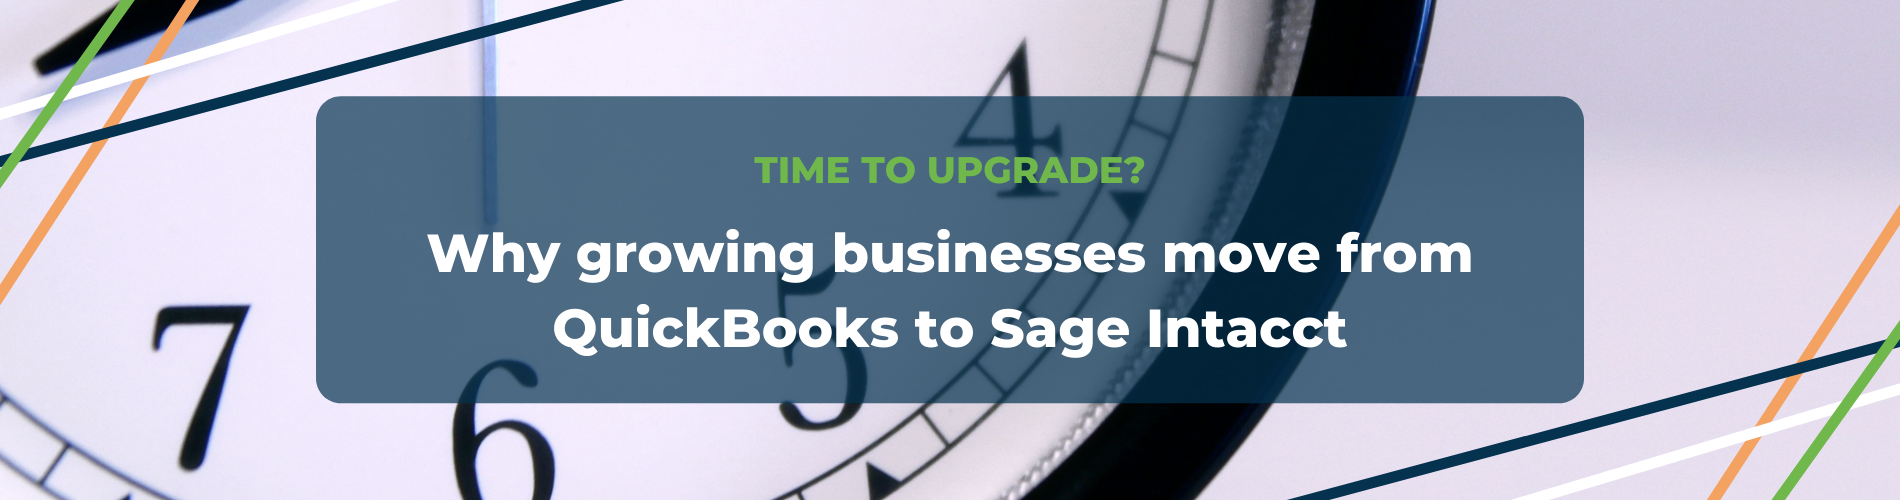 Why growing businesses move from QuickBooks to Sage Intacct